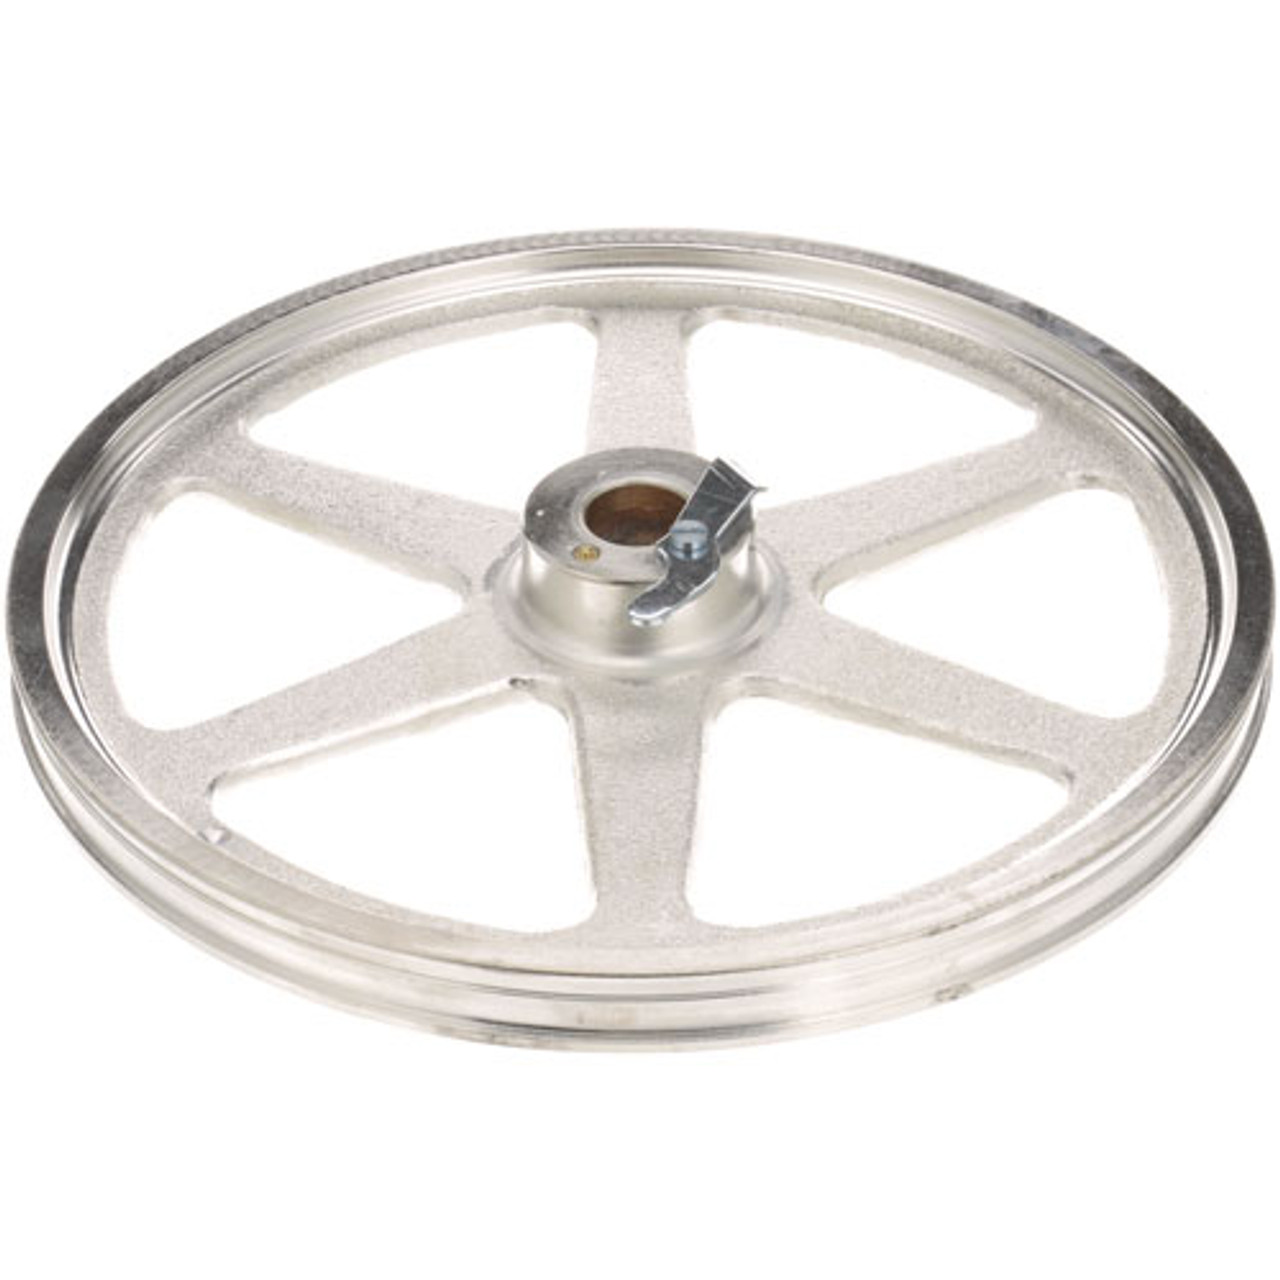 Saw Wheel - Replacement Part For Hobart 00-435582